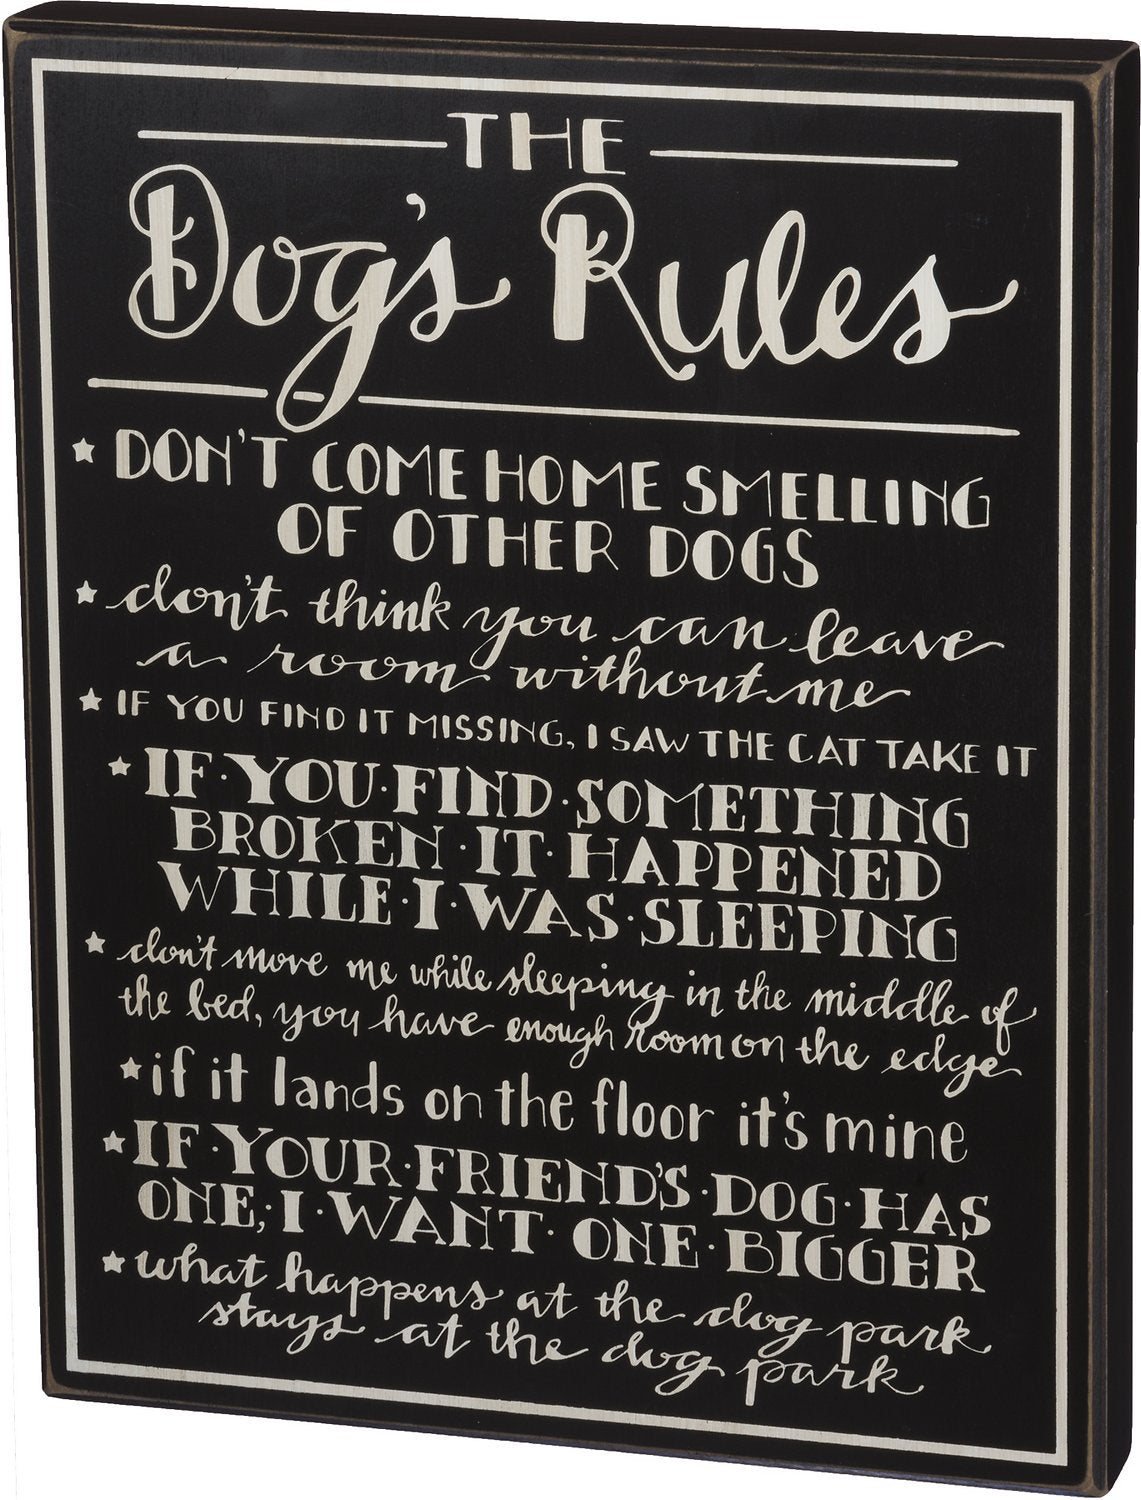 The Dog's Rules